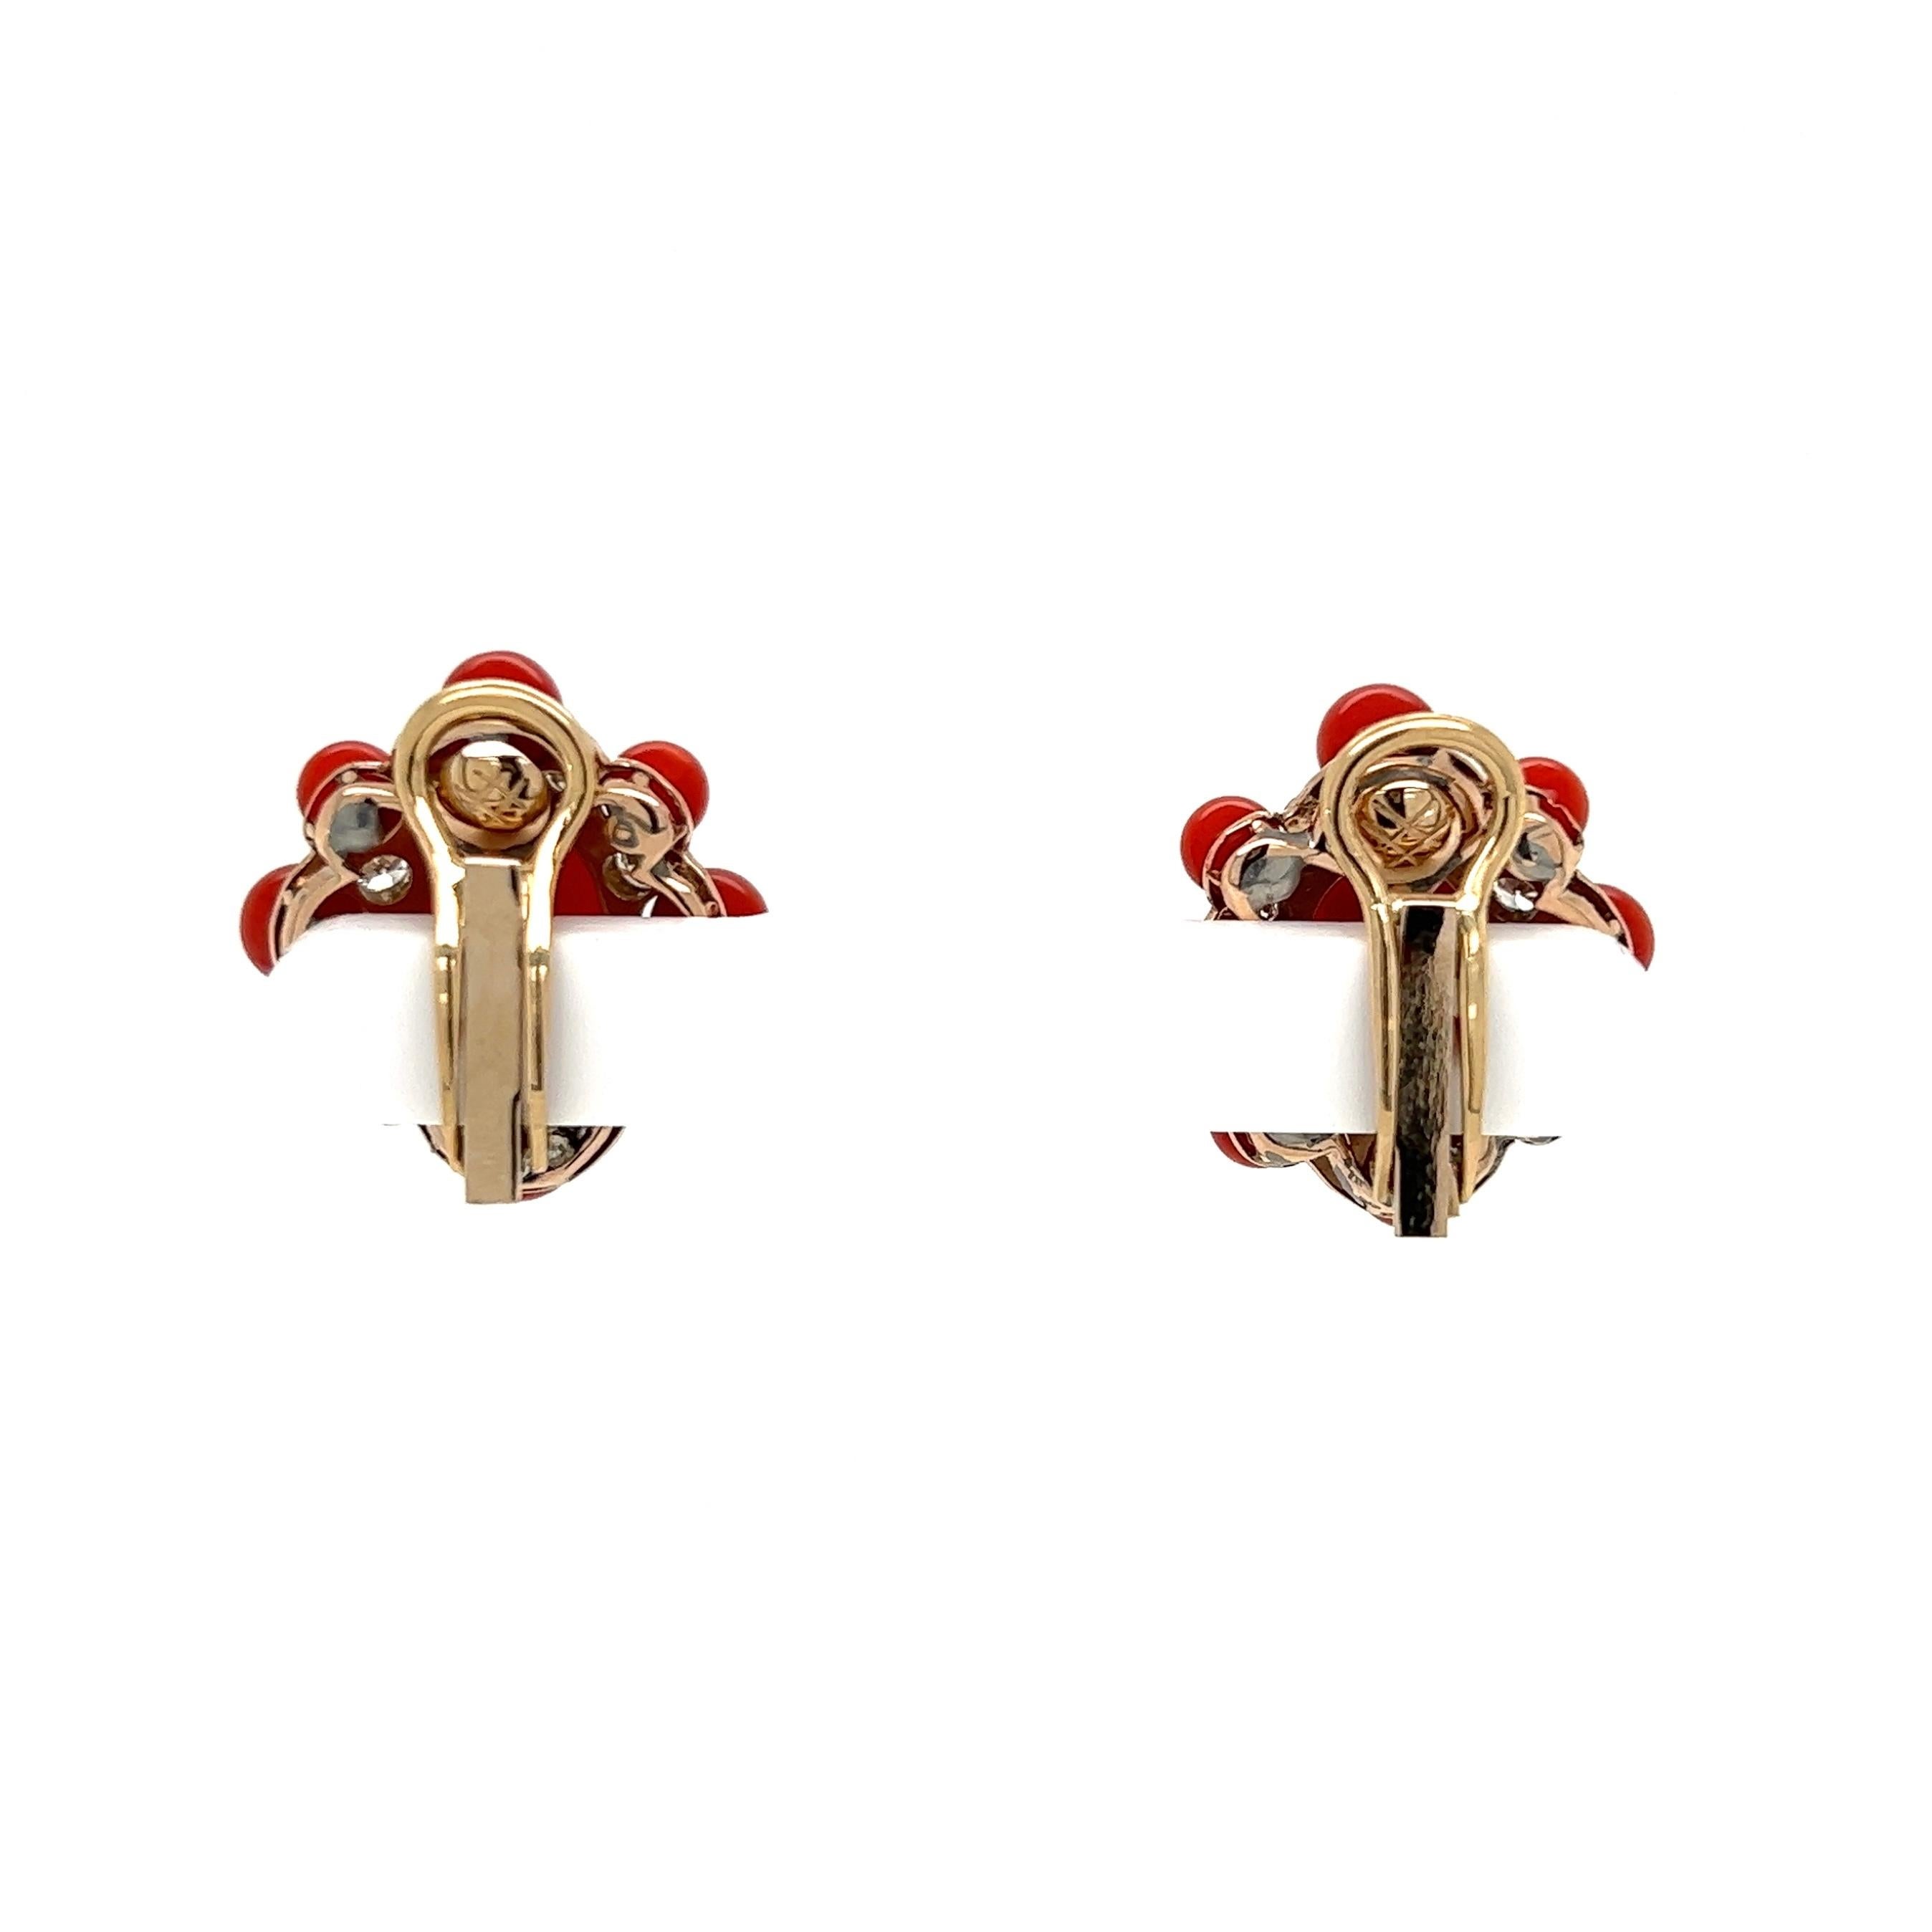 coral gold earrings india